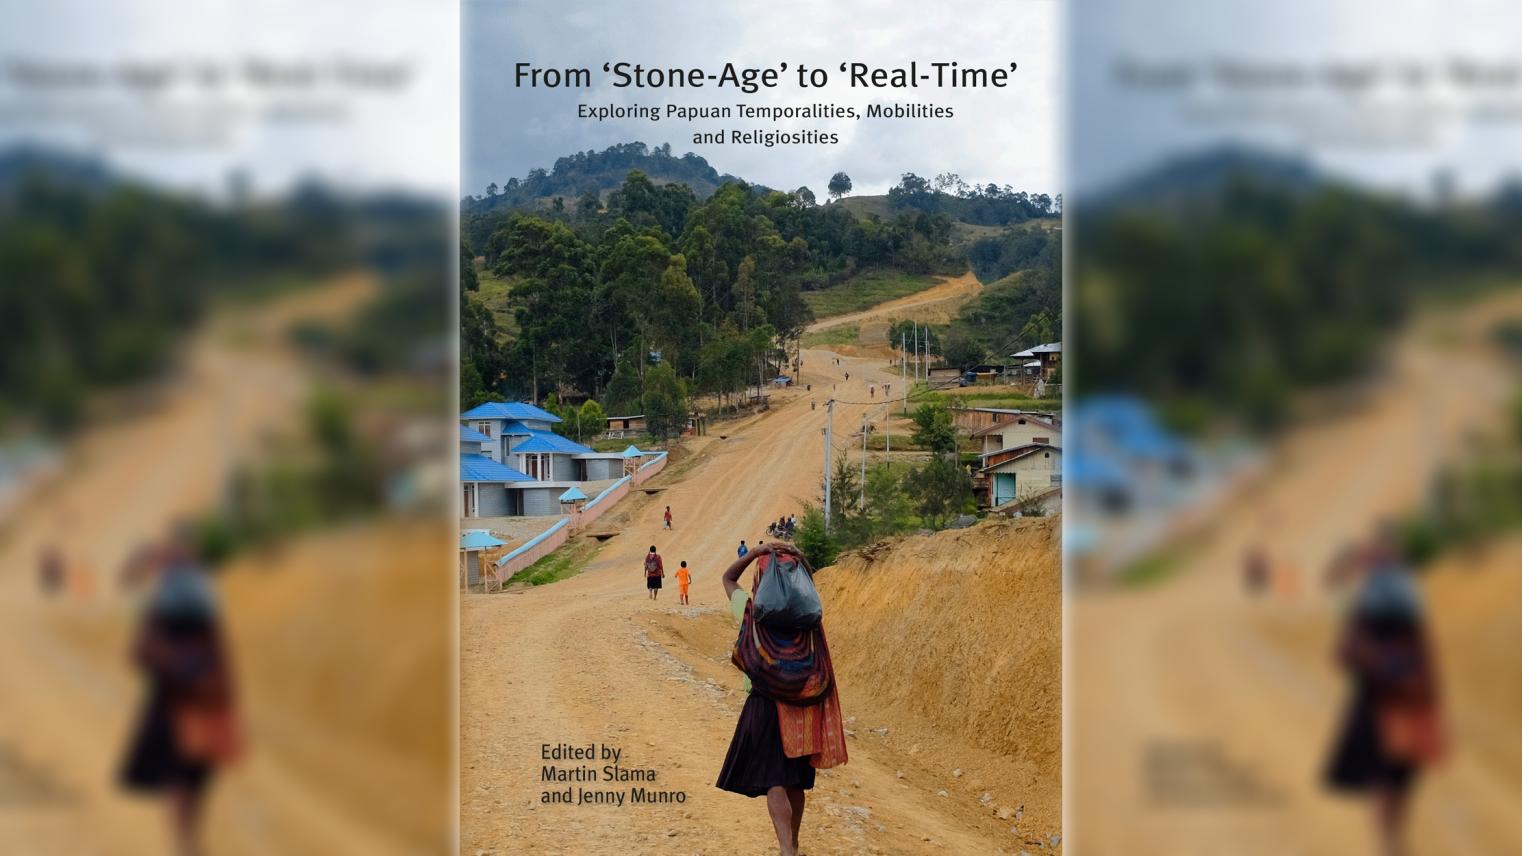 From 'Stone-Age' to 'Real-Time' Exploring Papuan Temporalities, Mobilities and Religiosities